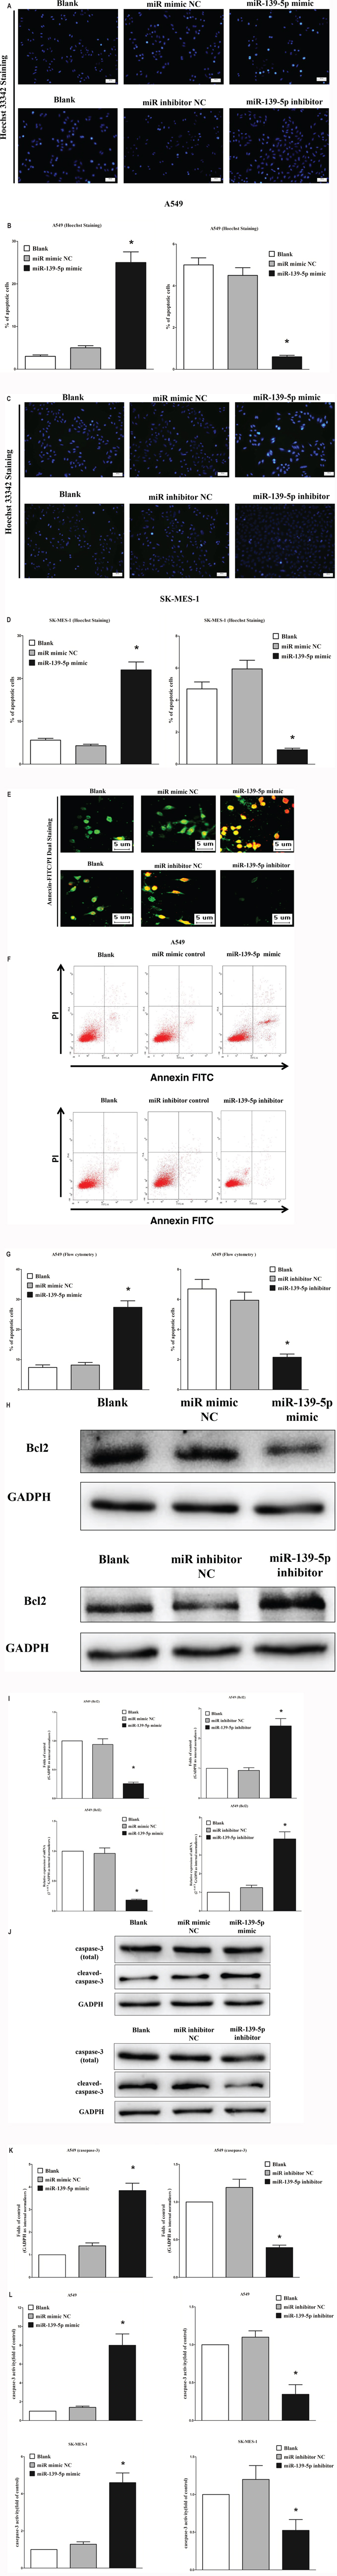 Ectopic expression of miR-139-5p promotes apoptosis in A549 and SK-MES-1 cells.